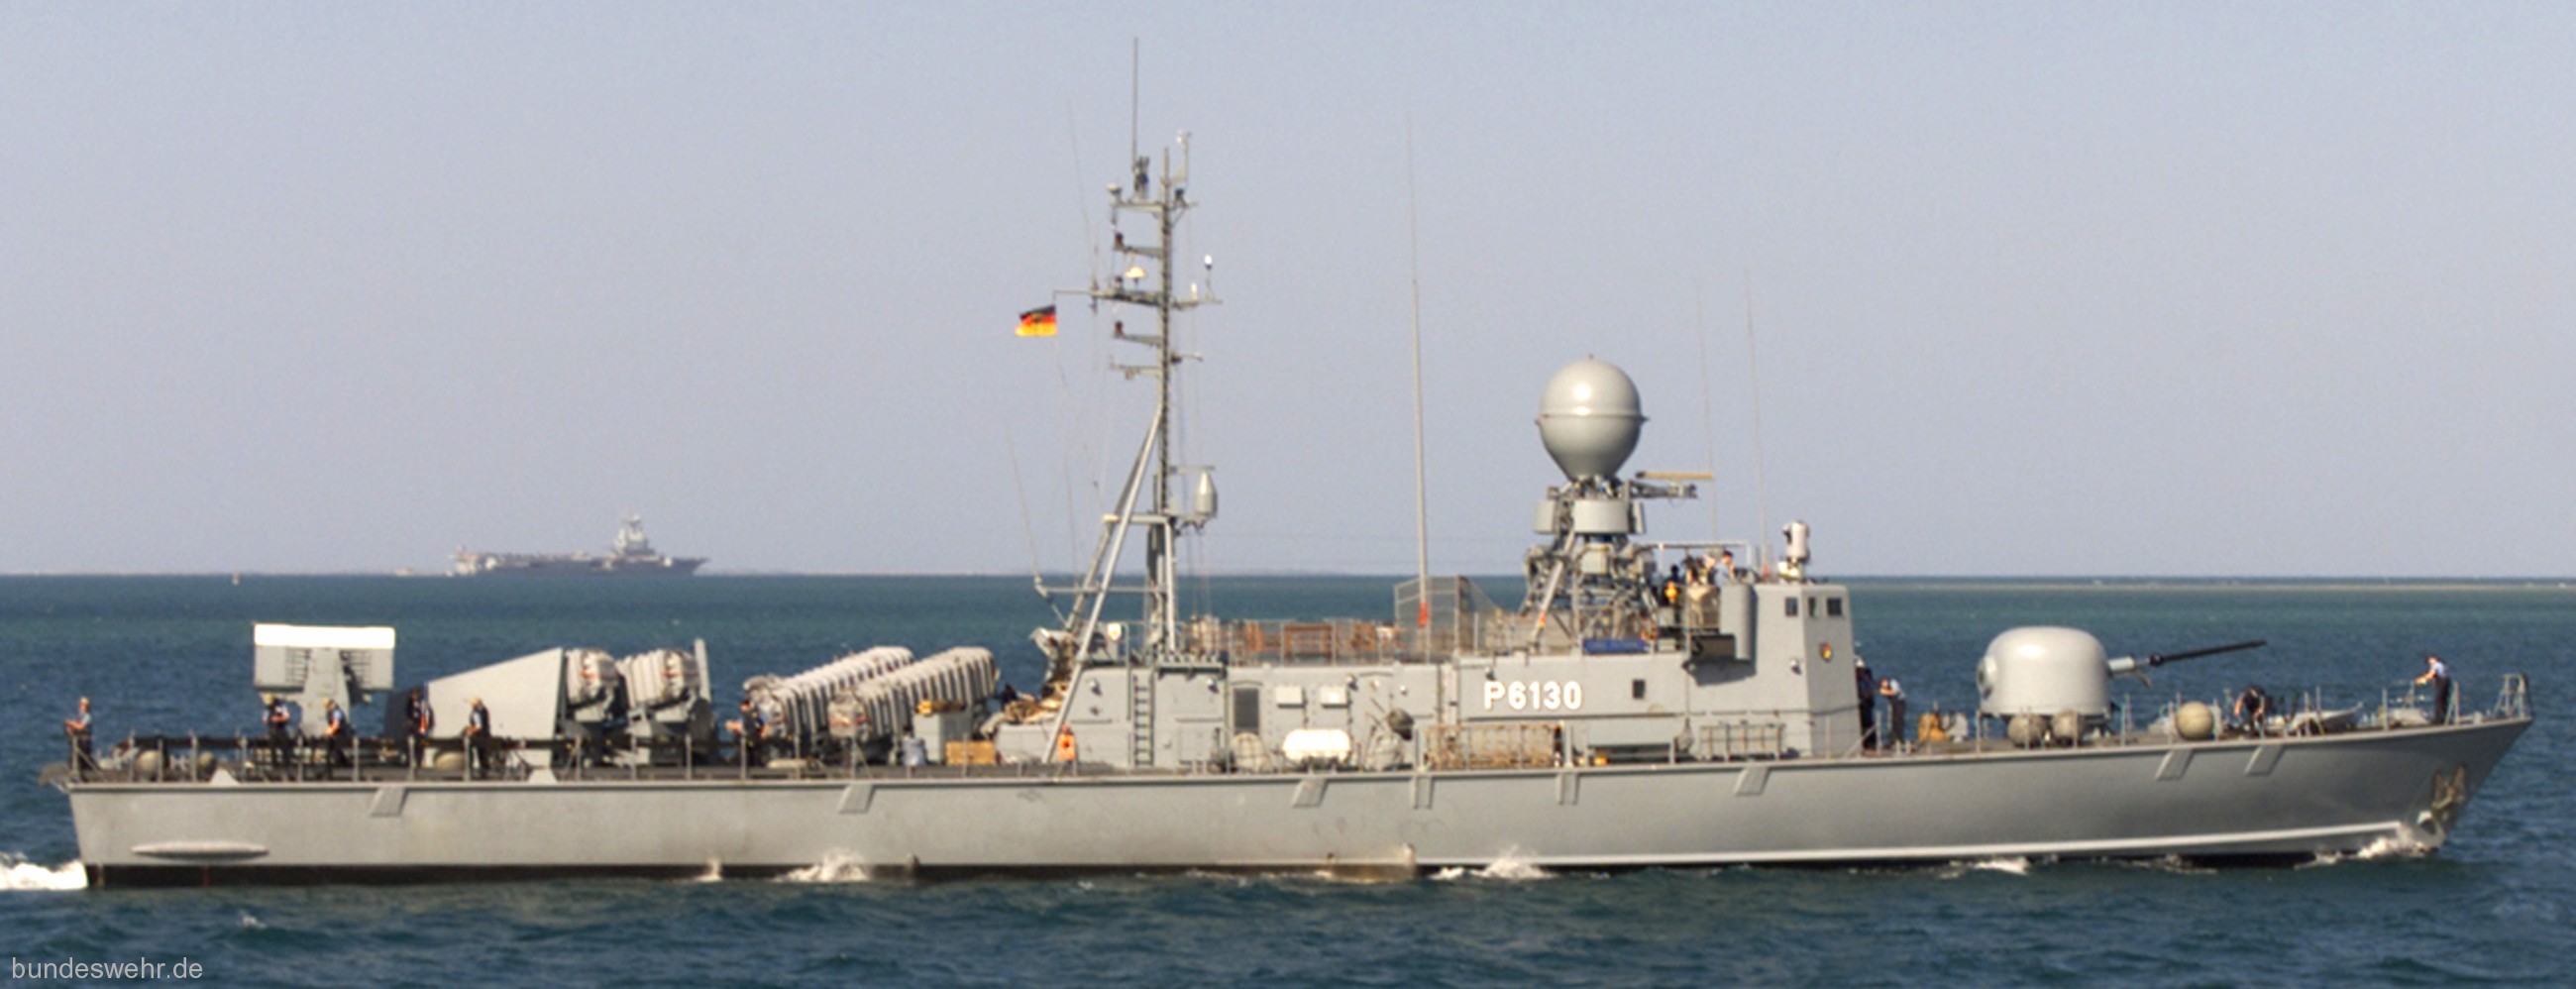 p6130 s80 fgs hyane type 143a gepard class fast attack missile craft german navy 09